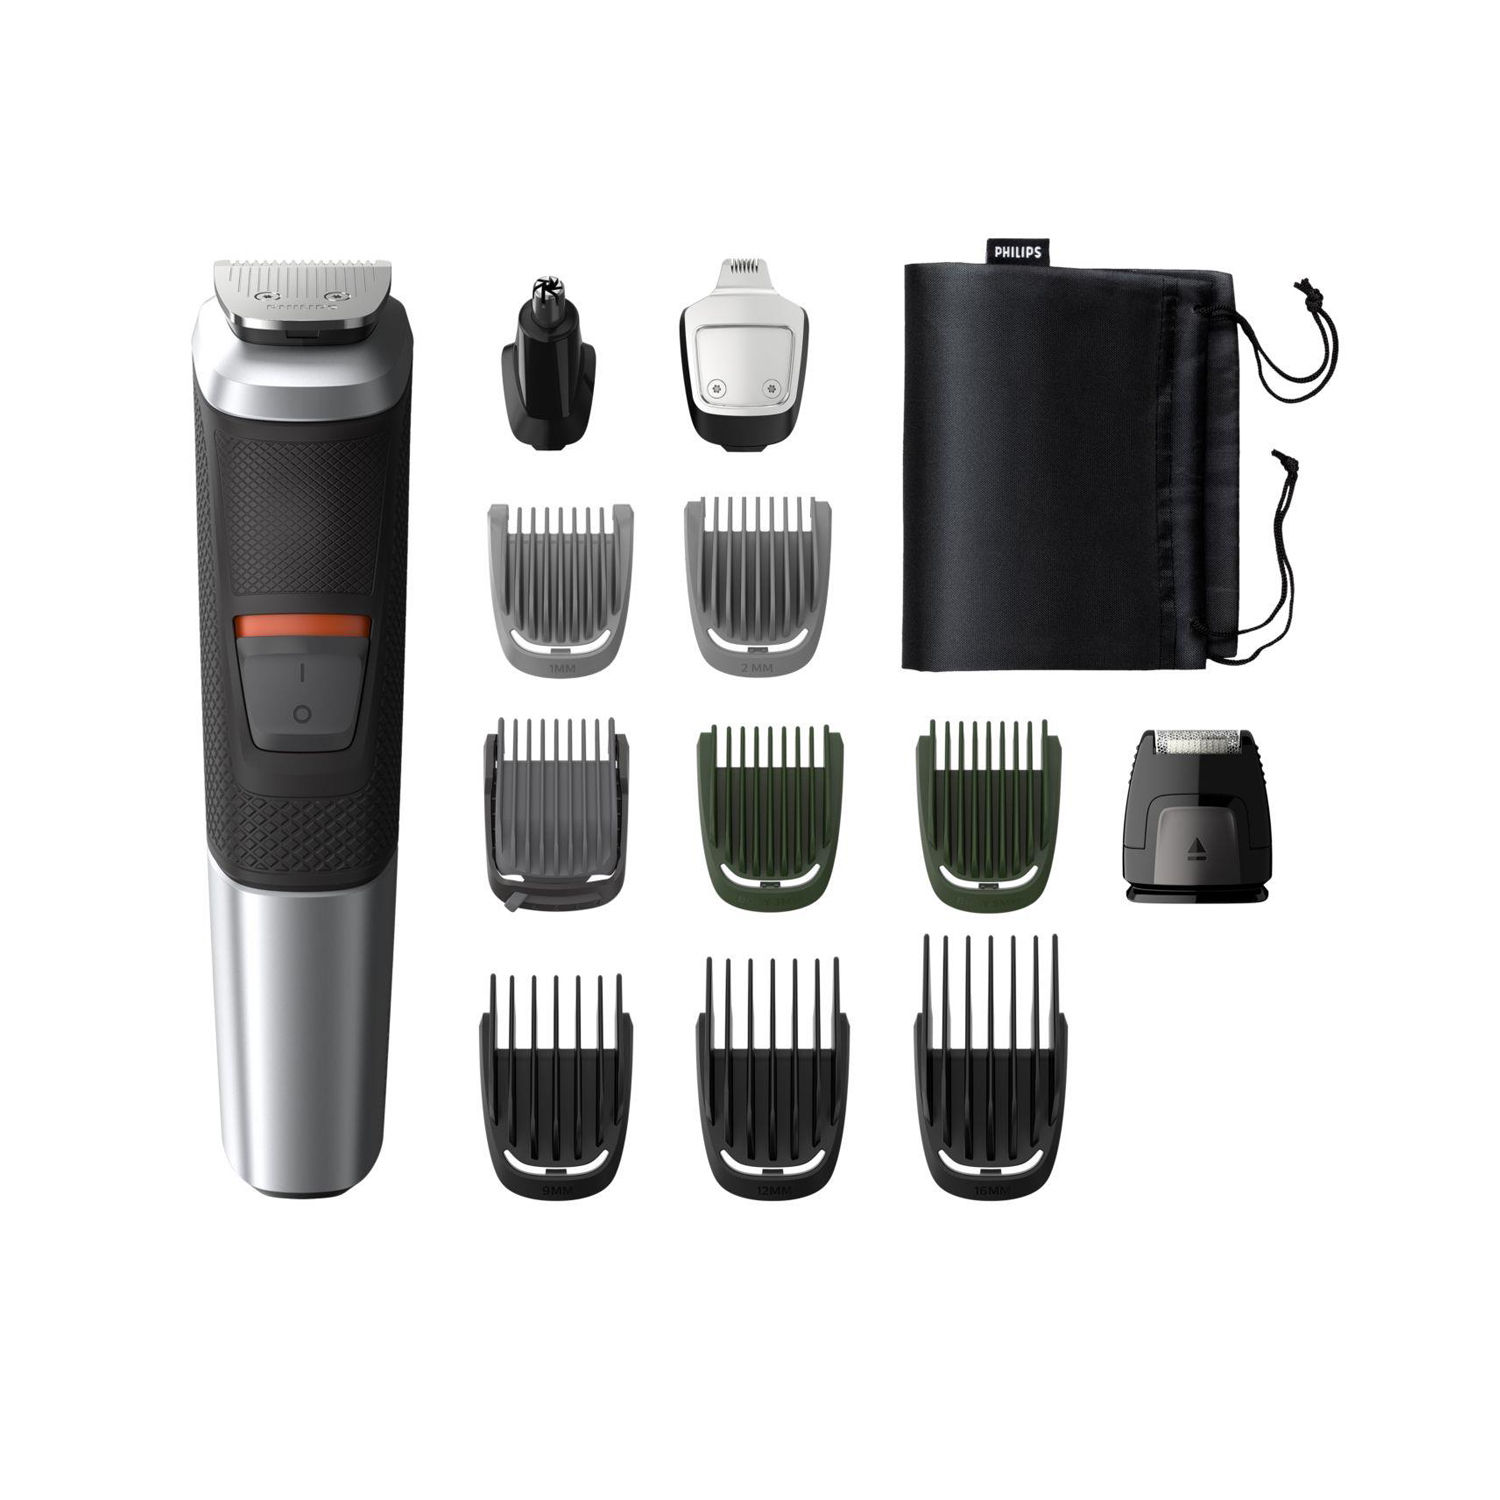 Philips Mg5740/15, 12-in-1, Face, Hair And Body - Multi Grooming Kit